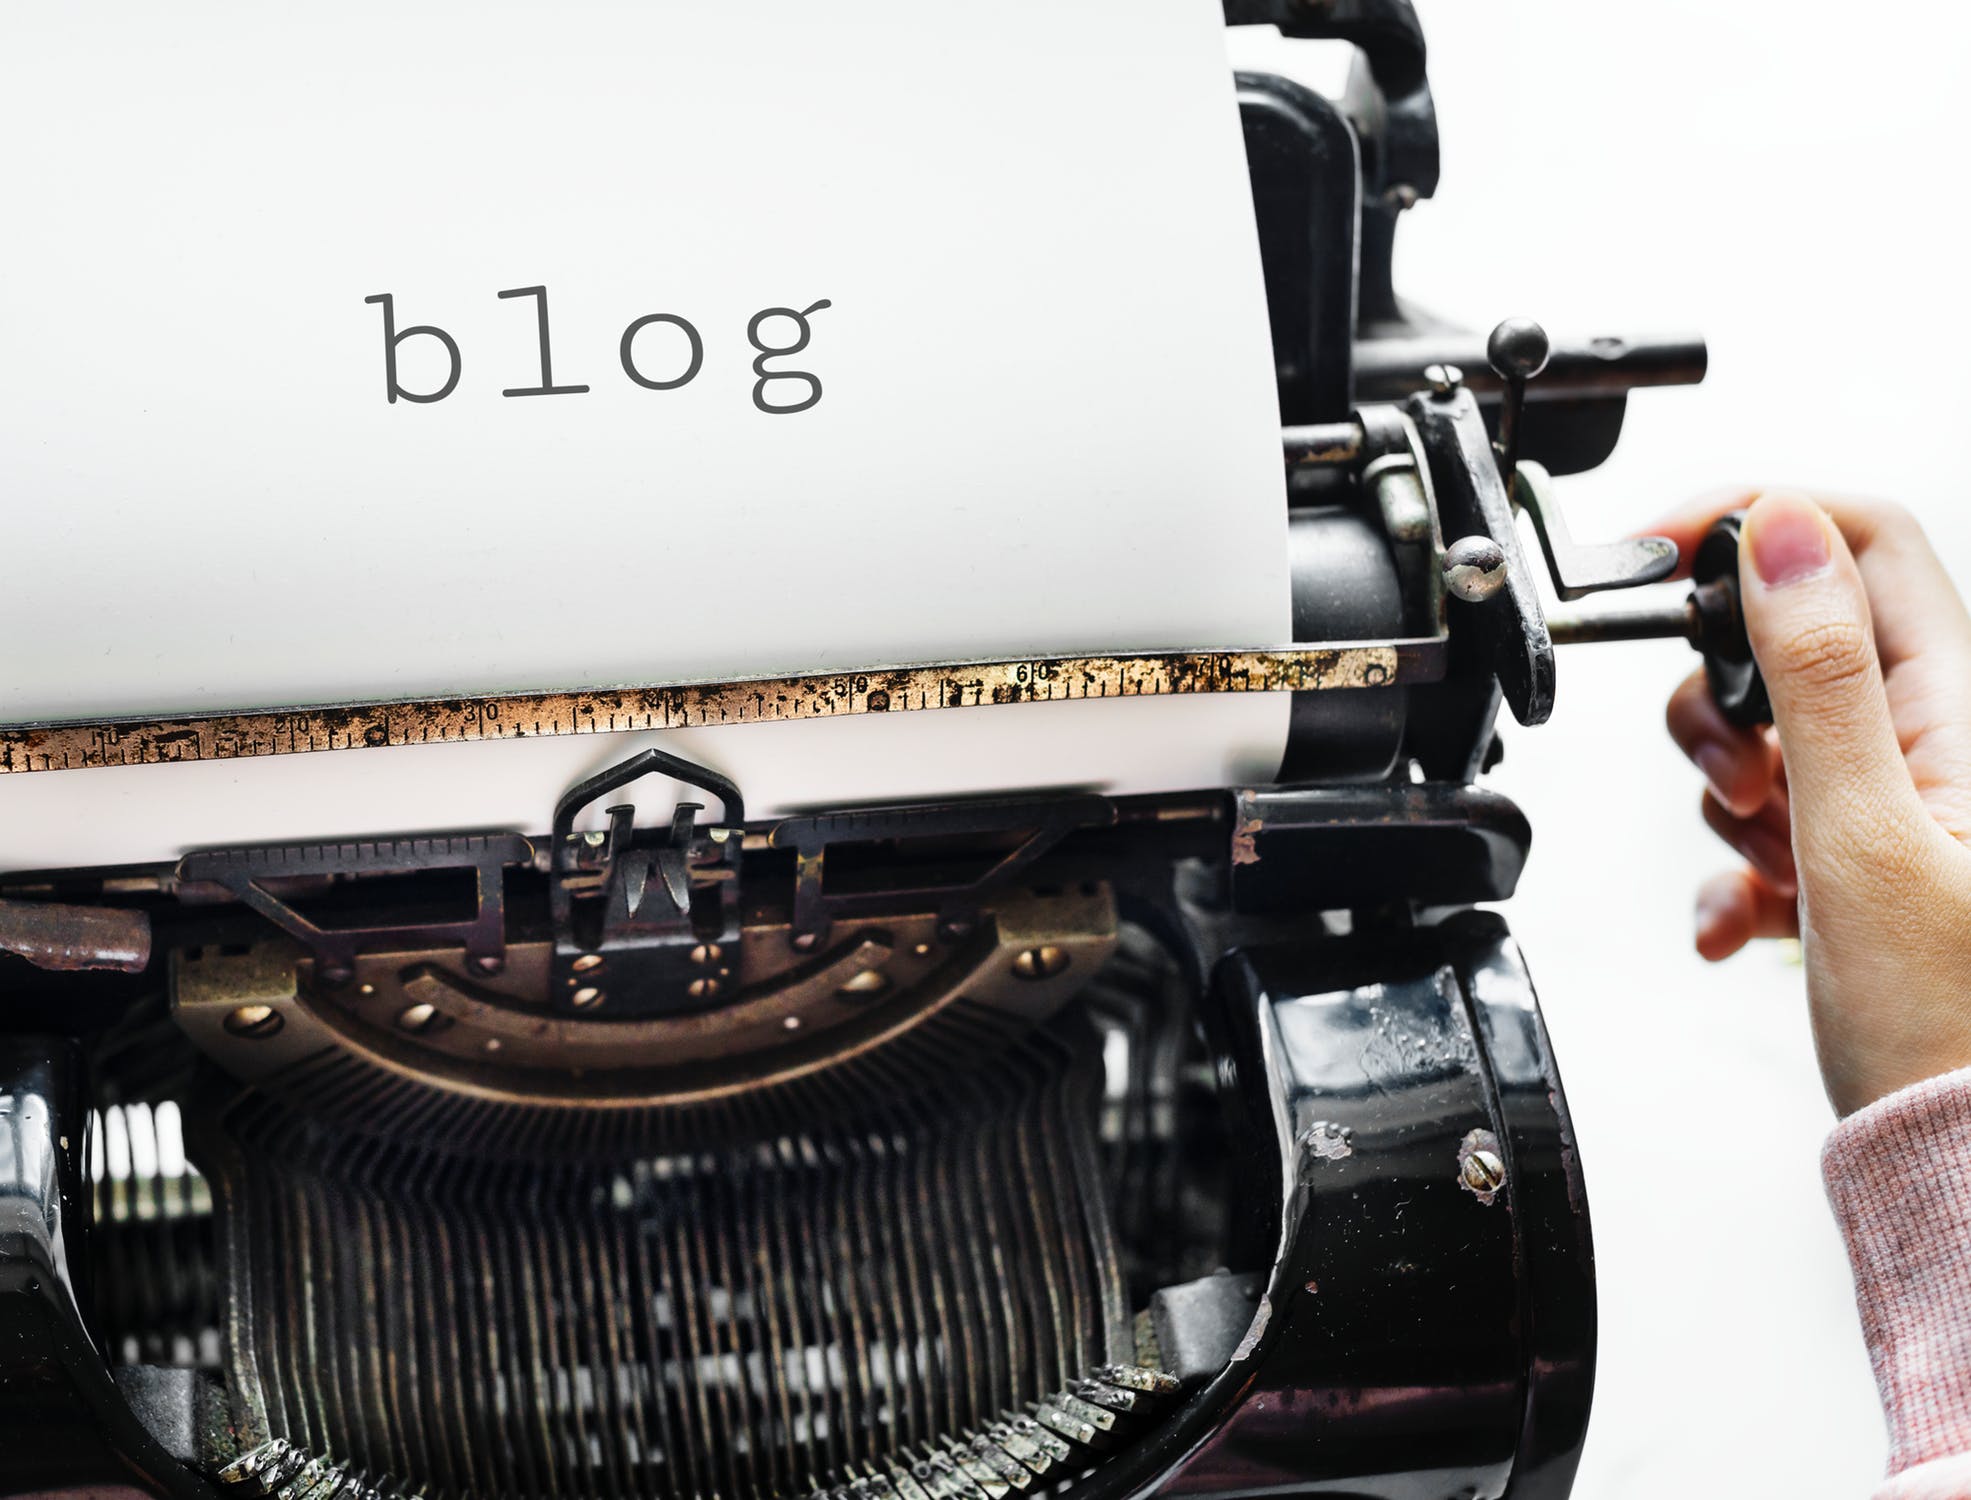 How to start blogging?